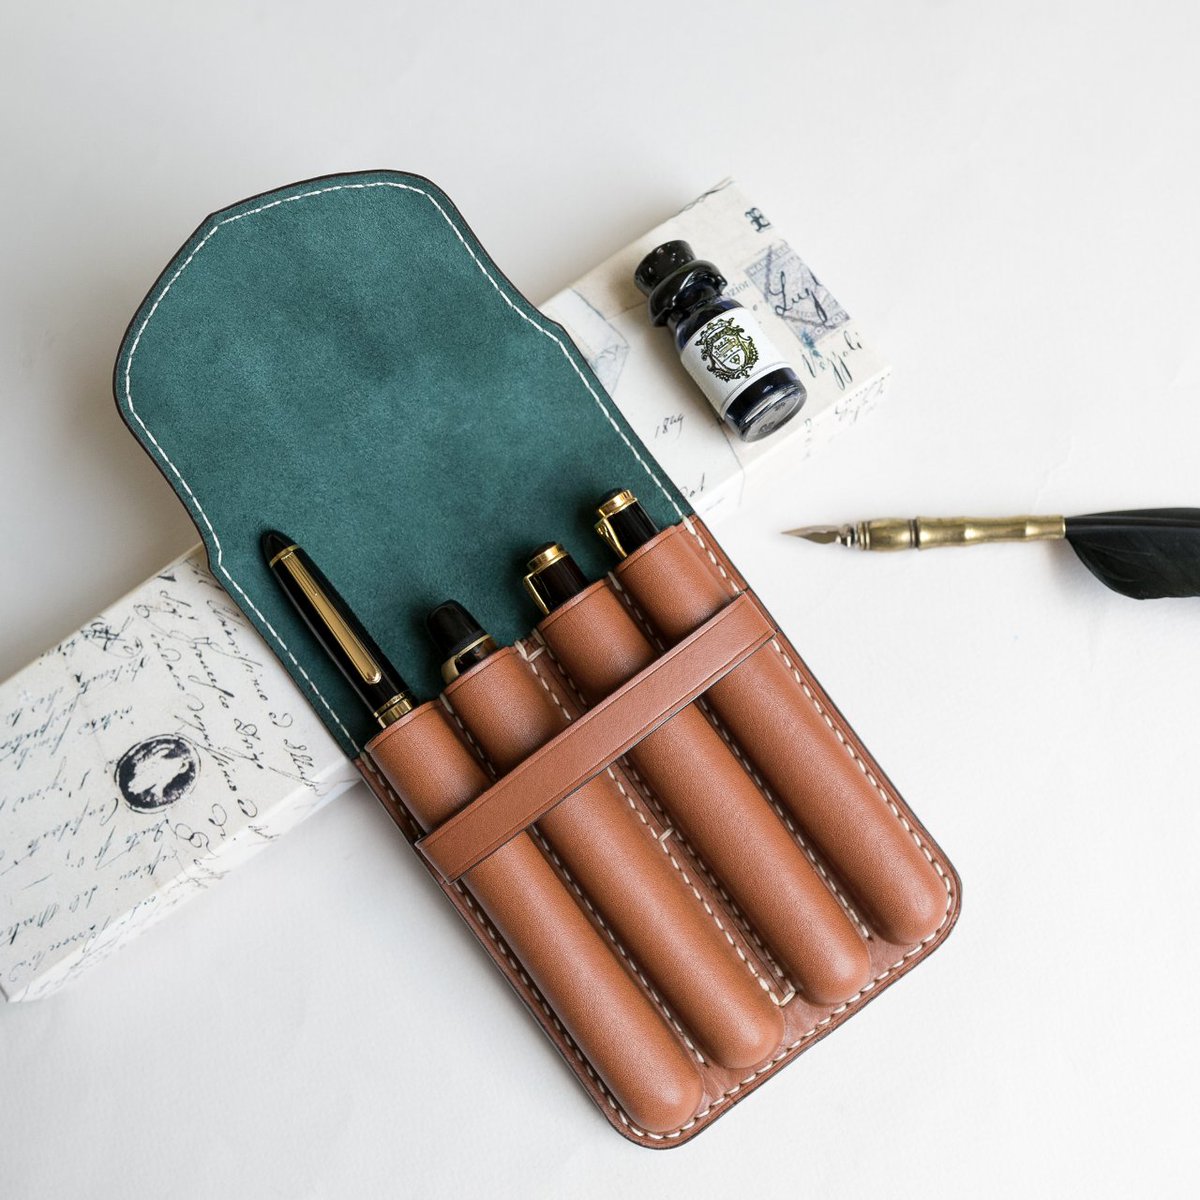 Luxury Leather Pen Case 4 Slot Fountain Pen Pouch, Pen Holder with Four Dividers, 4 Fountain Pen Organizer Personalised Gift for Him etsy.me/3KysG04 via @Etsy #etsyireland #fountainpen #penshowsanfrancisco #penshow #pencollectors